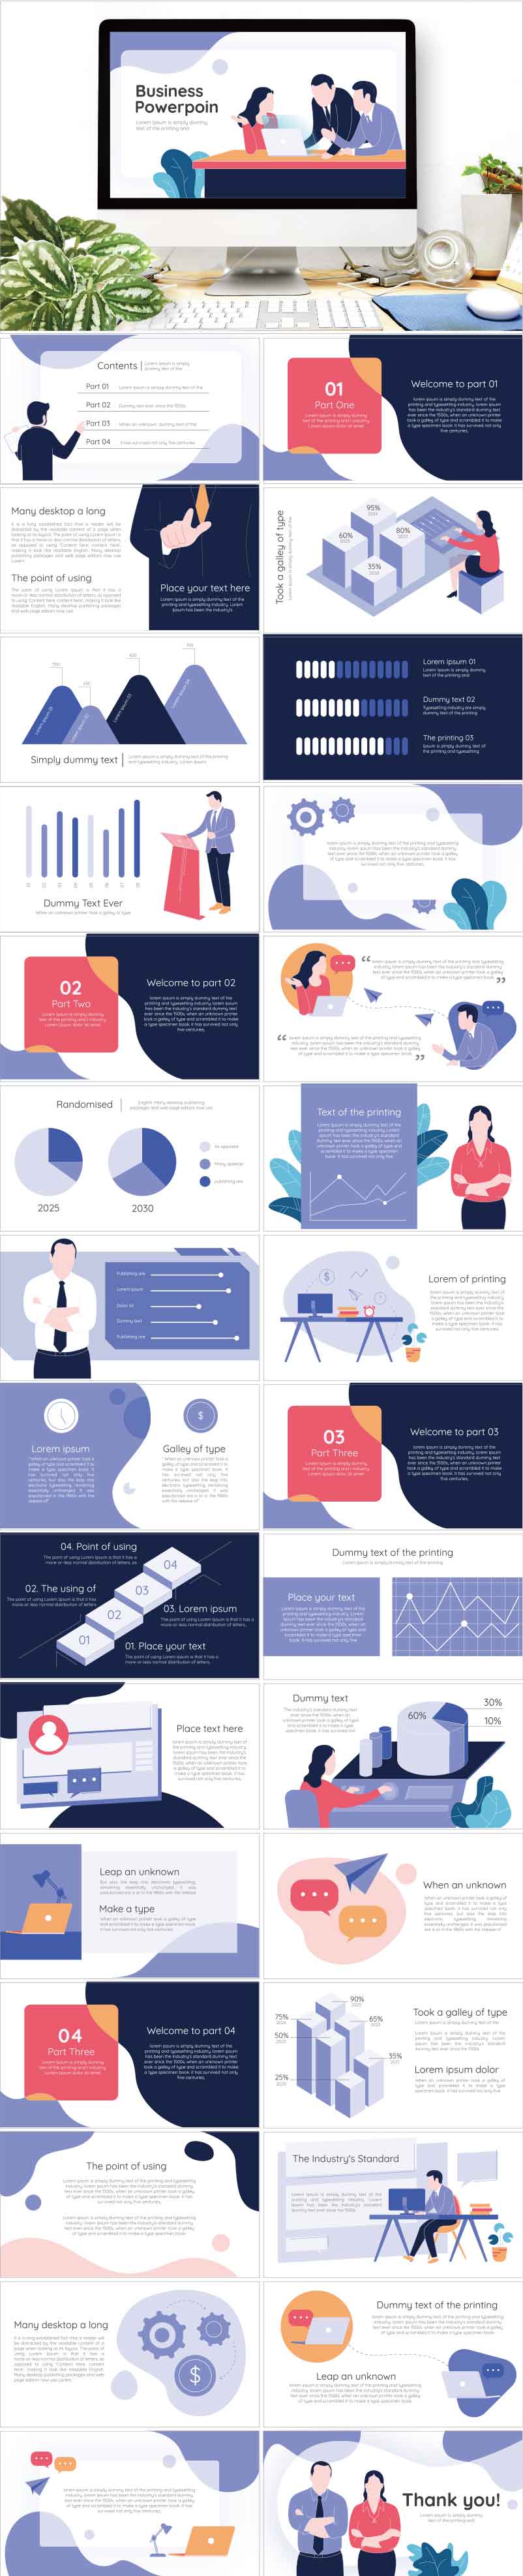 PowerPoint template vol.46